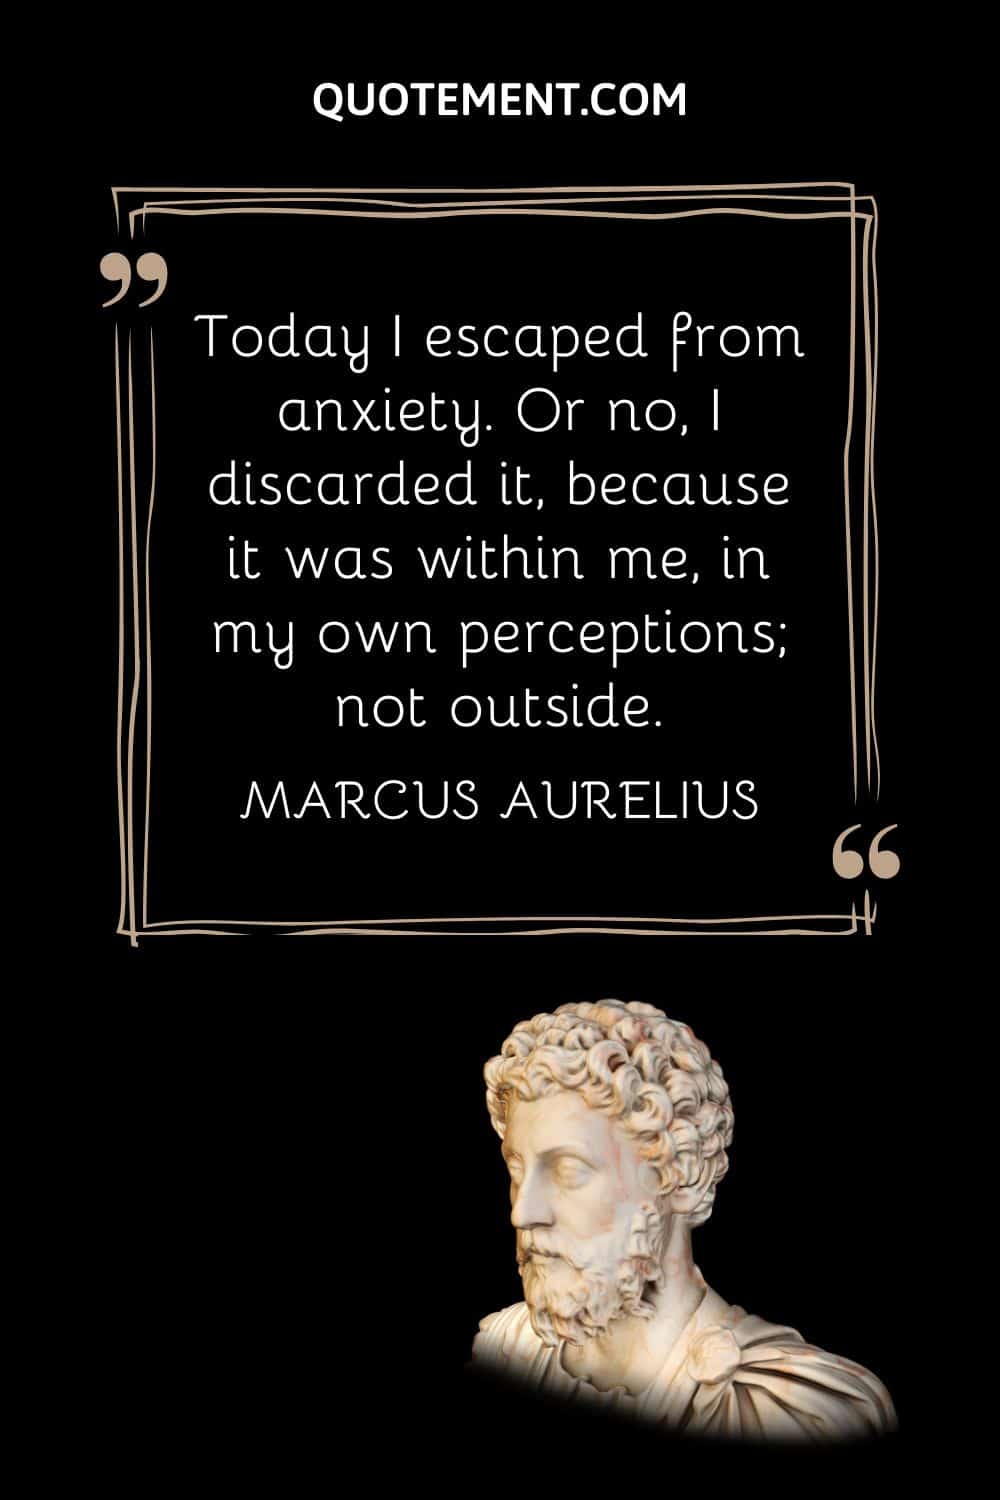 “Today I escaped from anxiety. Or no, I discarded it, because it was within me, in my own perceptions; not outside.” — Marcus Aurelius